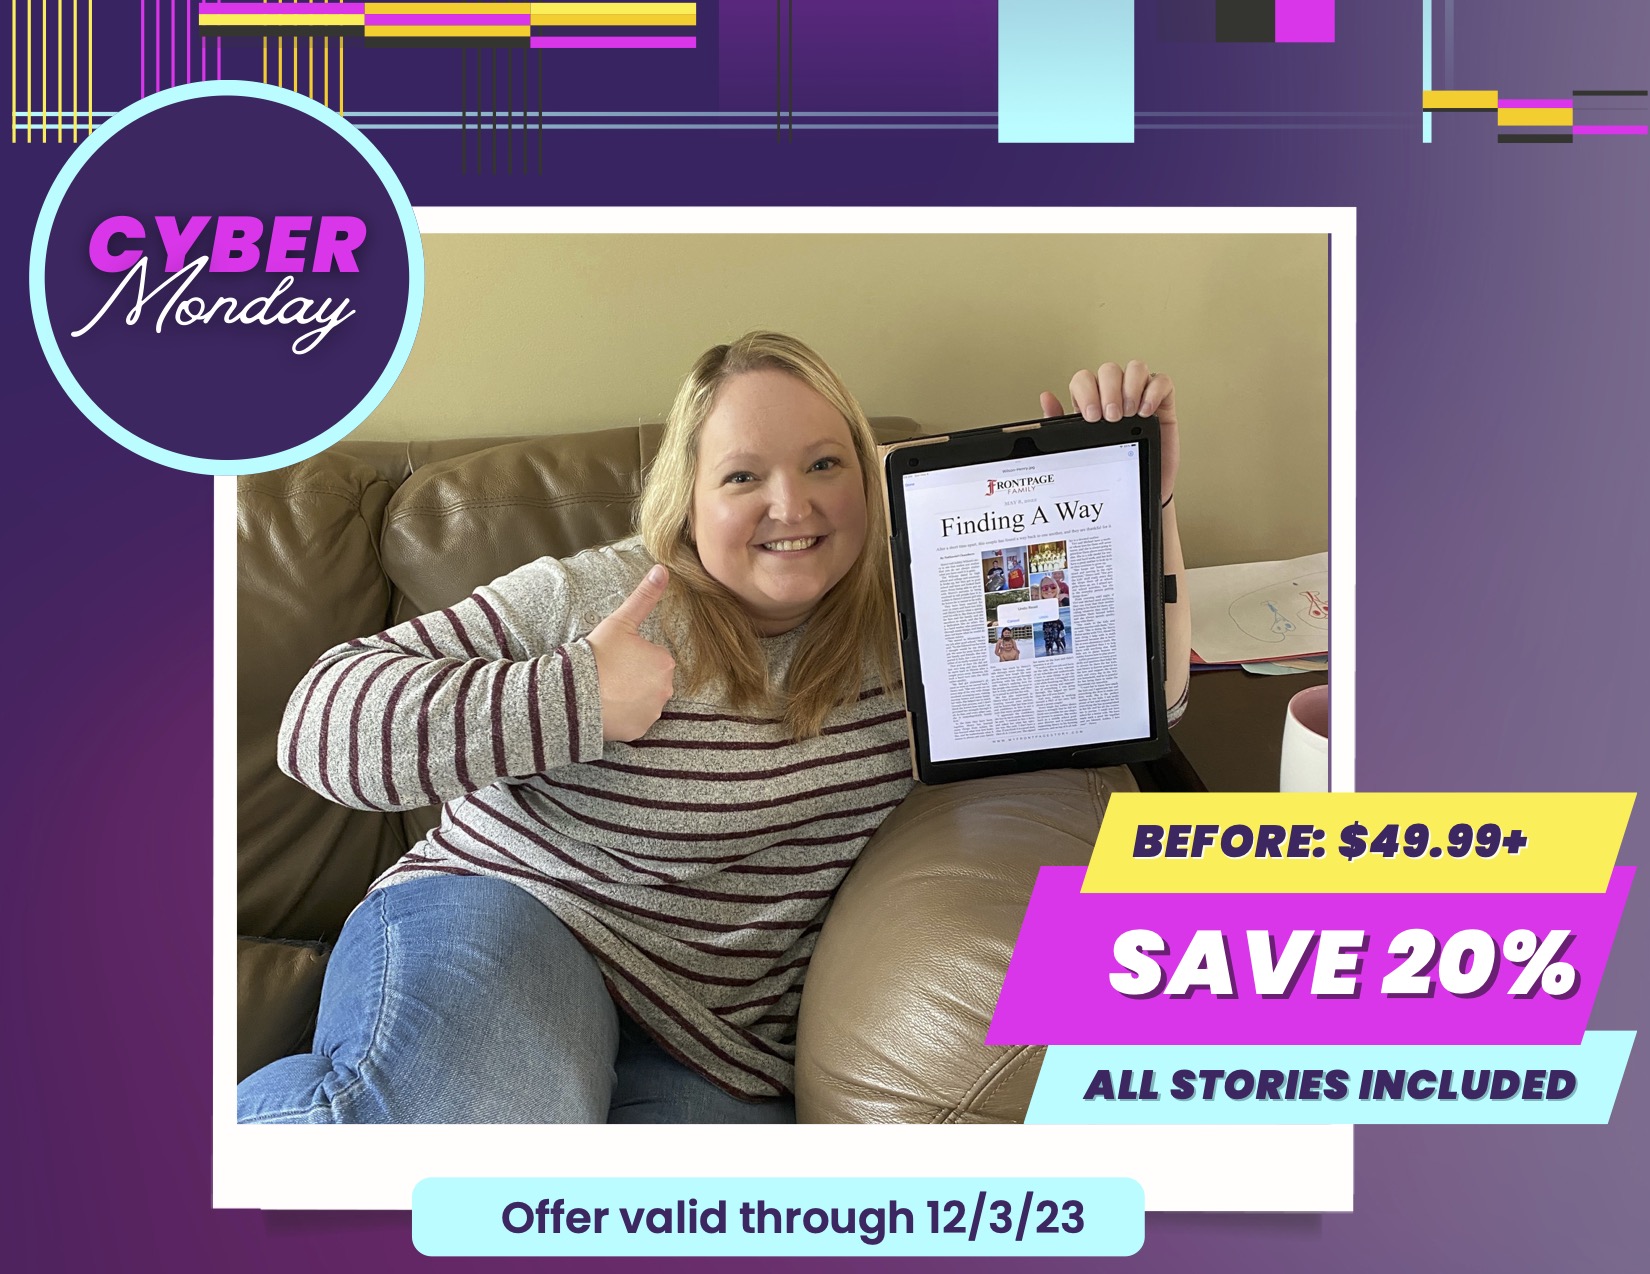 Cyber Monday Sale ad with woman holding her digital personalized story on the couch